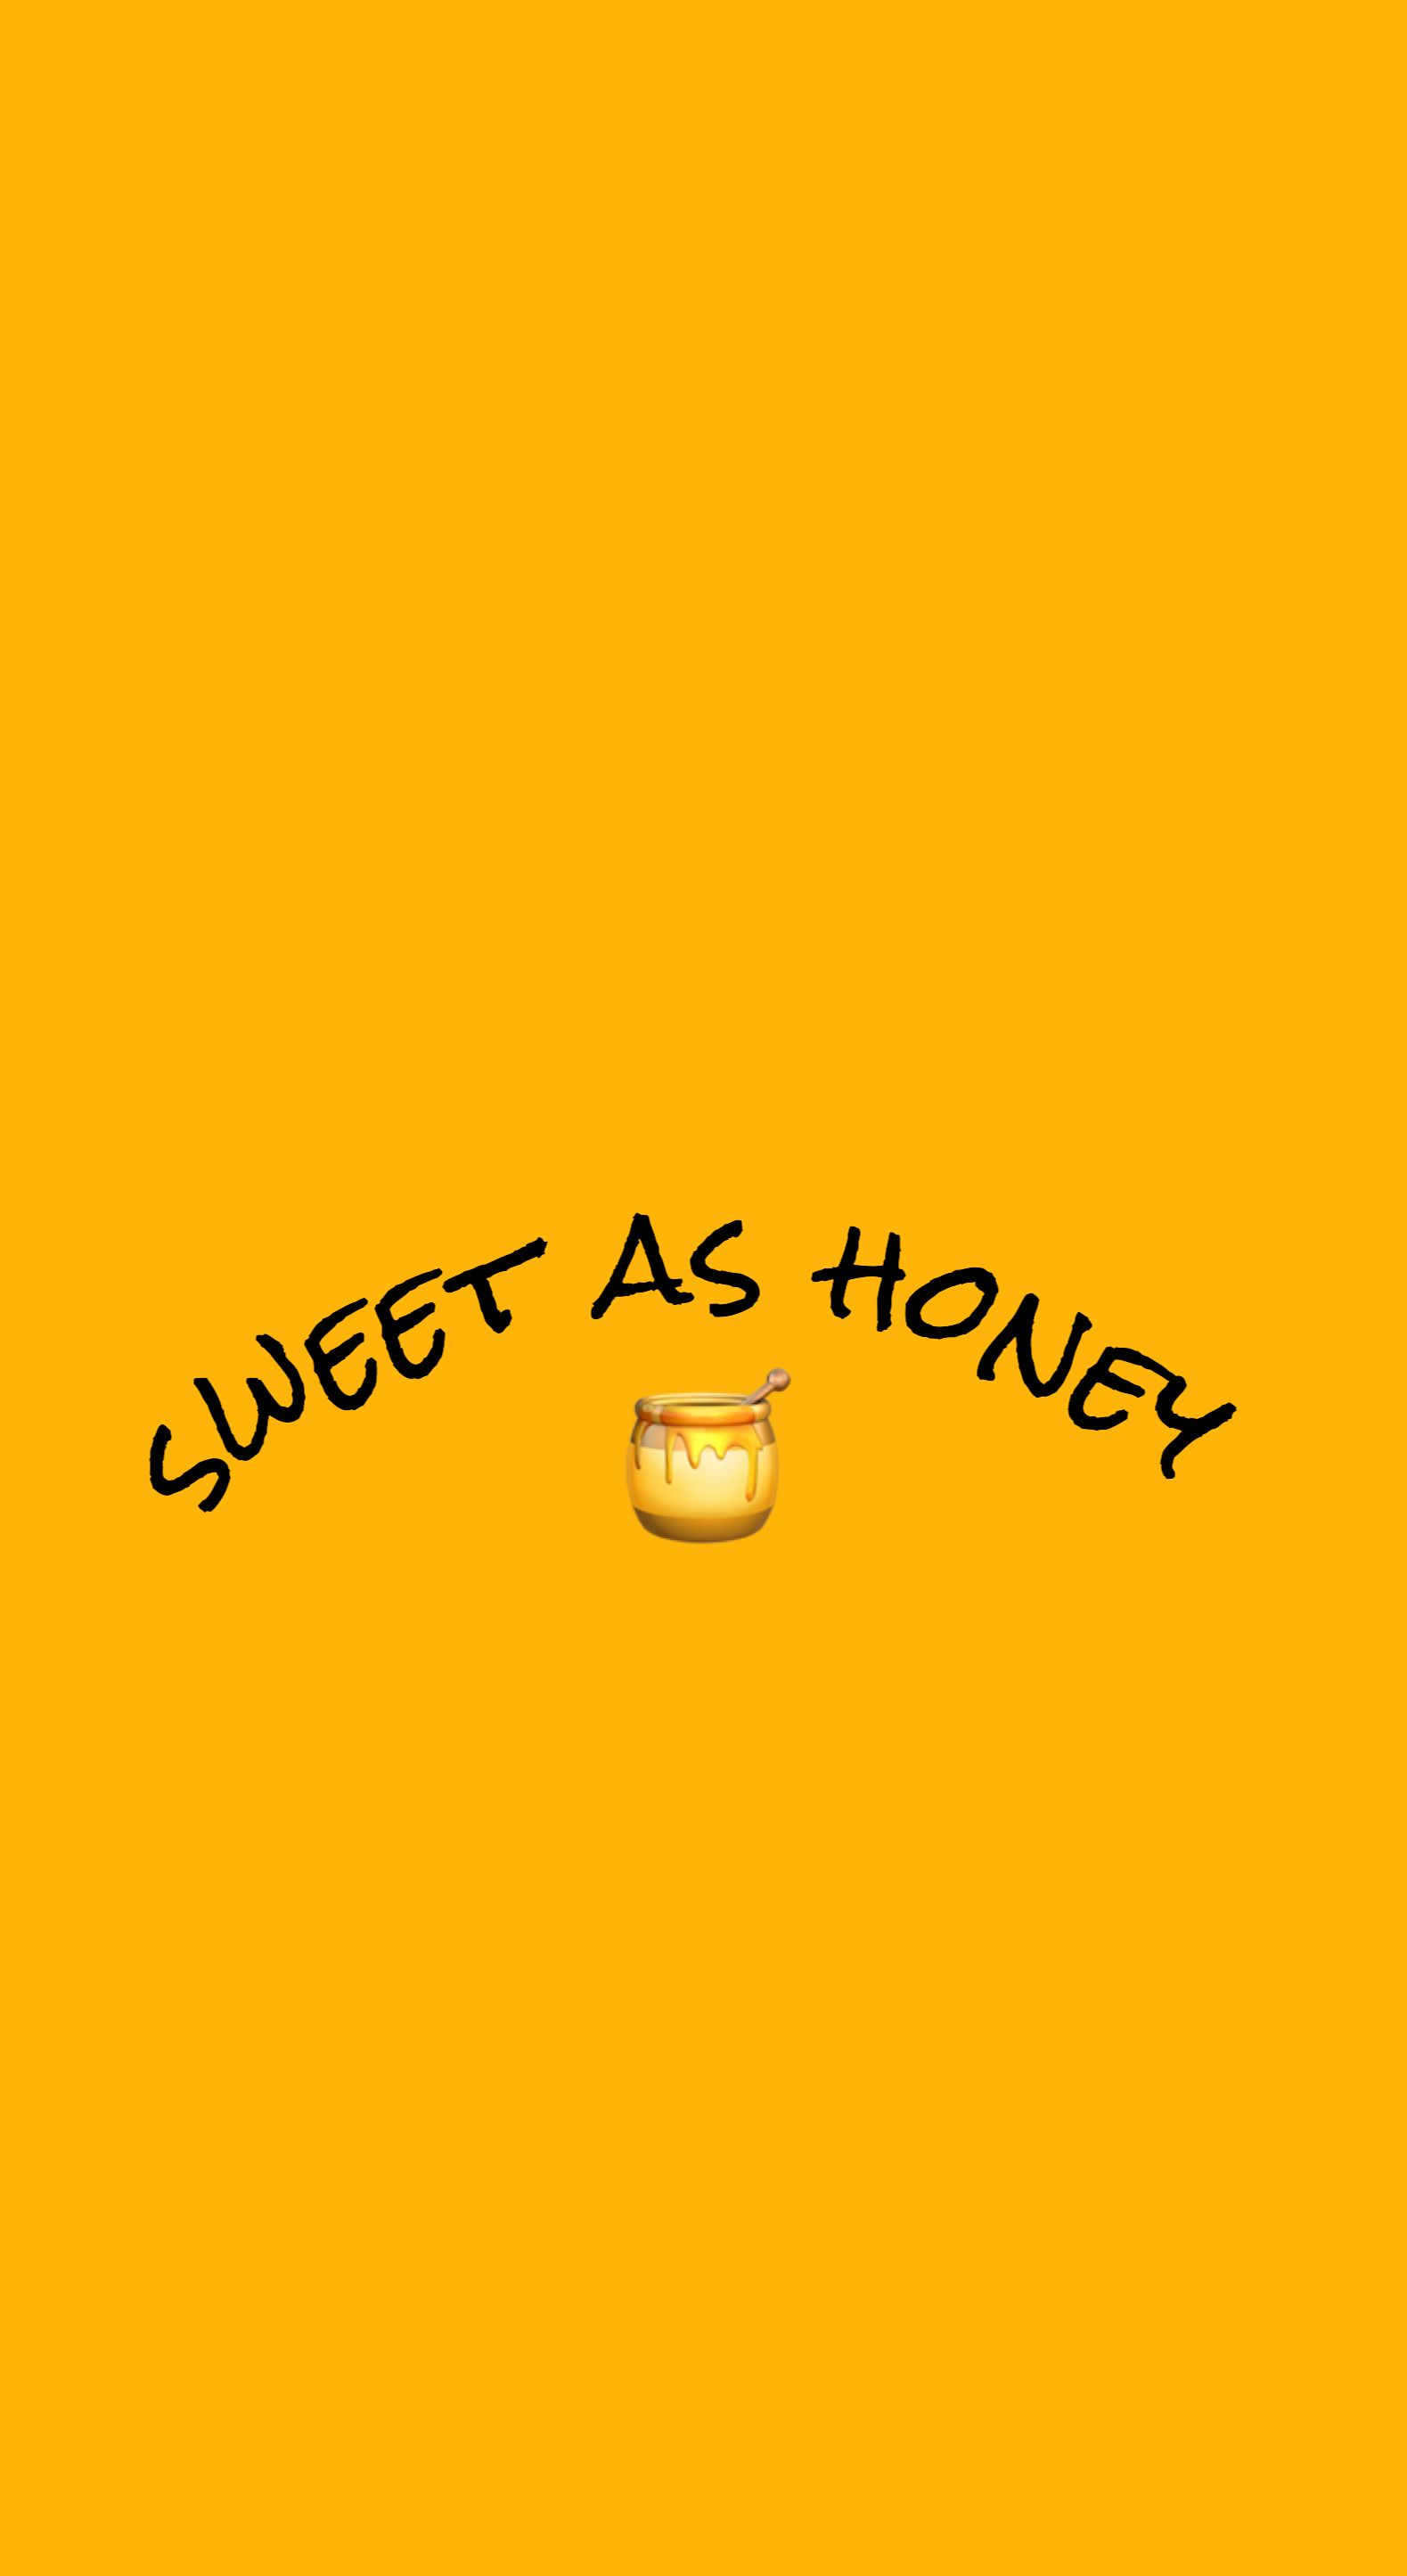 Sweet as Honey. Quote prints, Phone themes, Yellow wallet